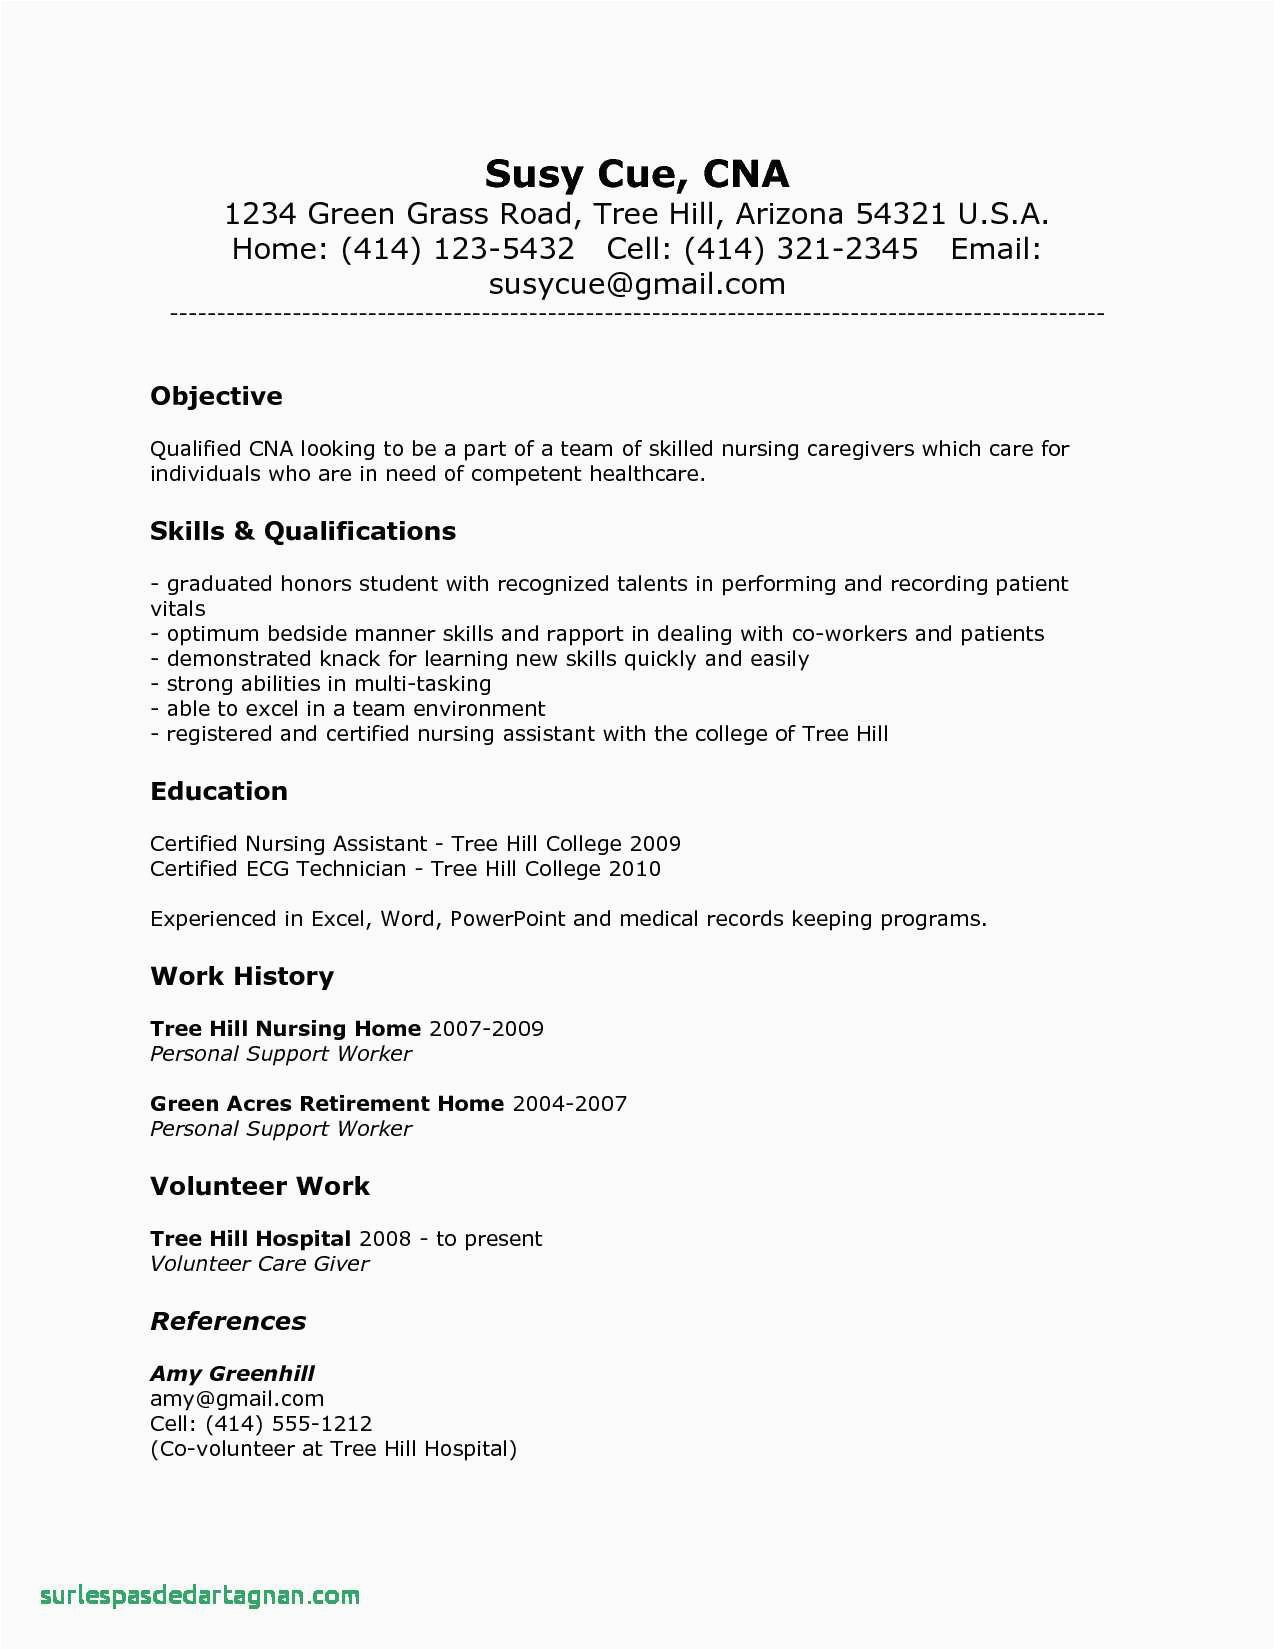 Resume Sample for Nurses without Experience Philippines 78 New S Sample Resume for Registered Nurse without Experience